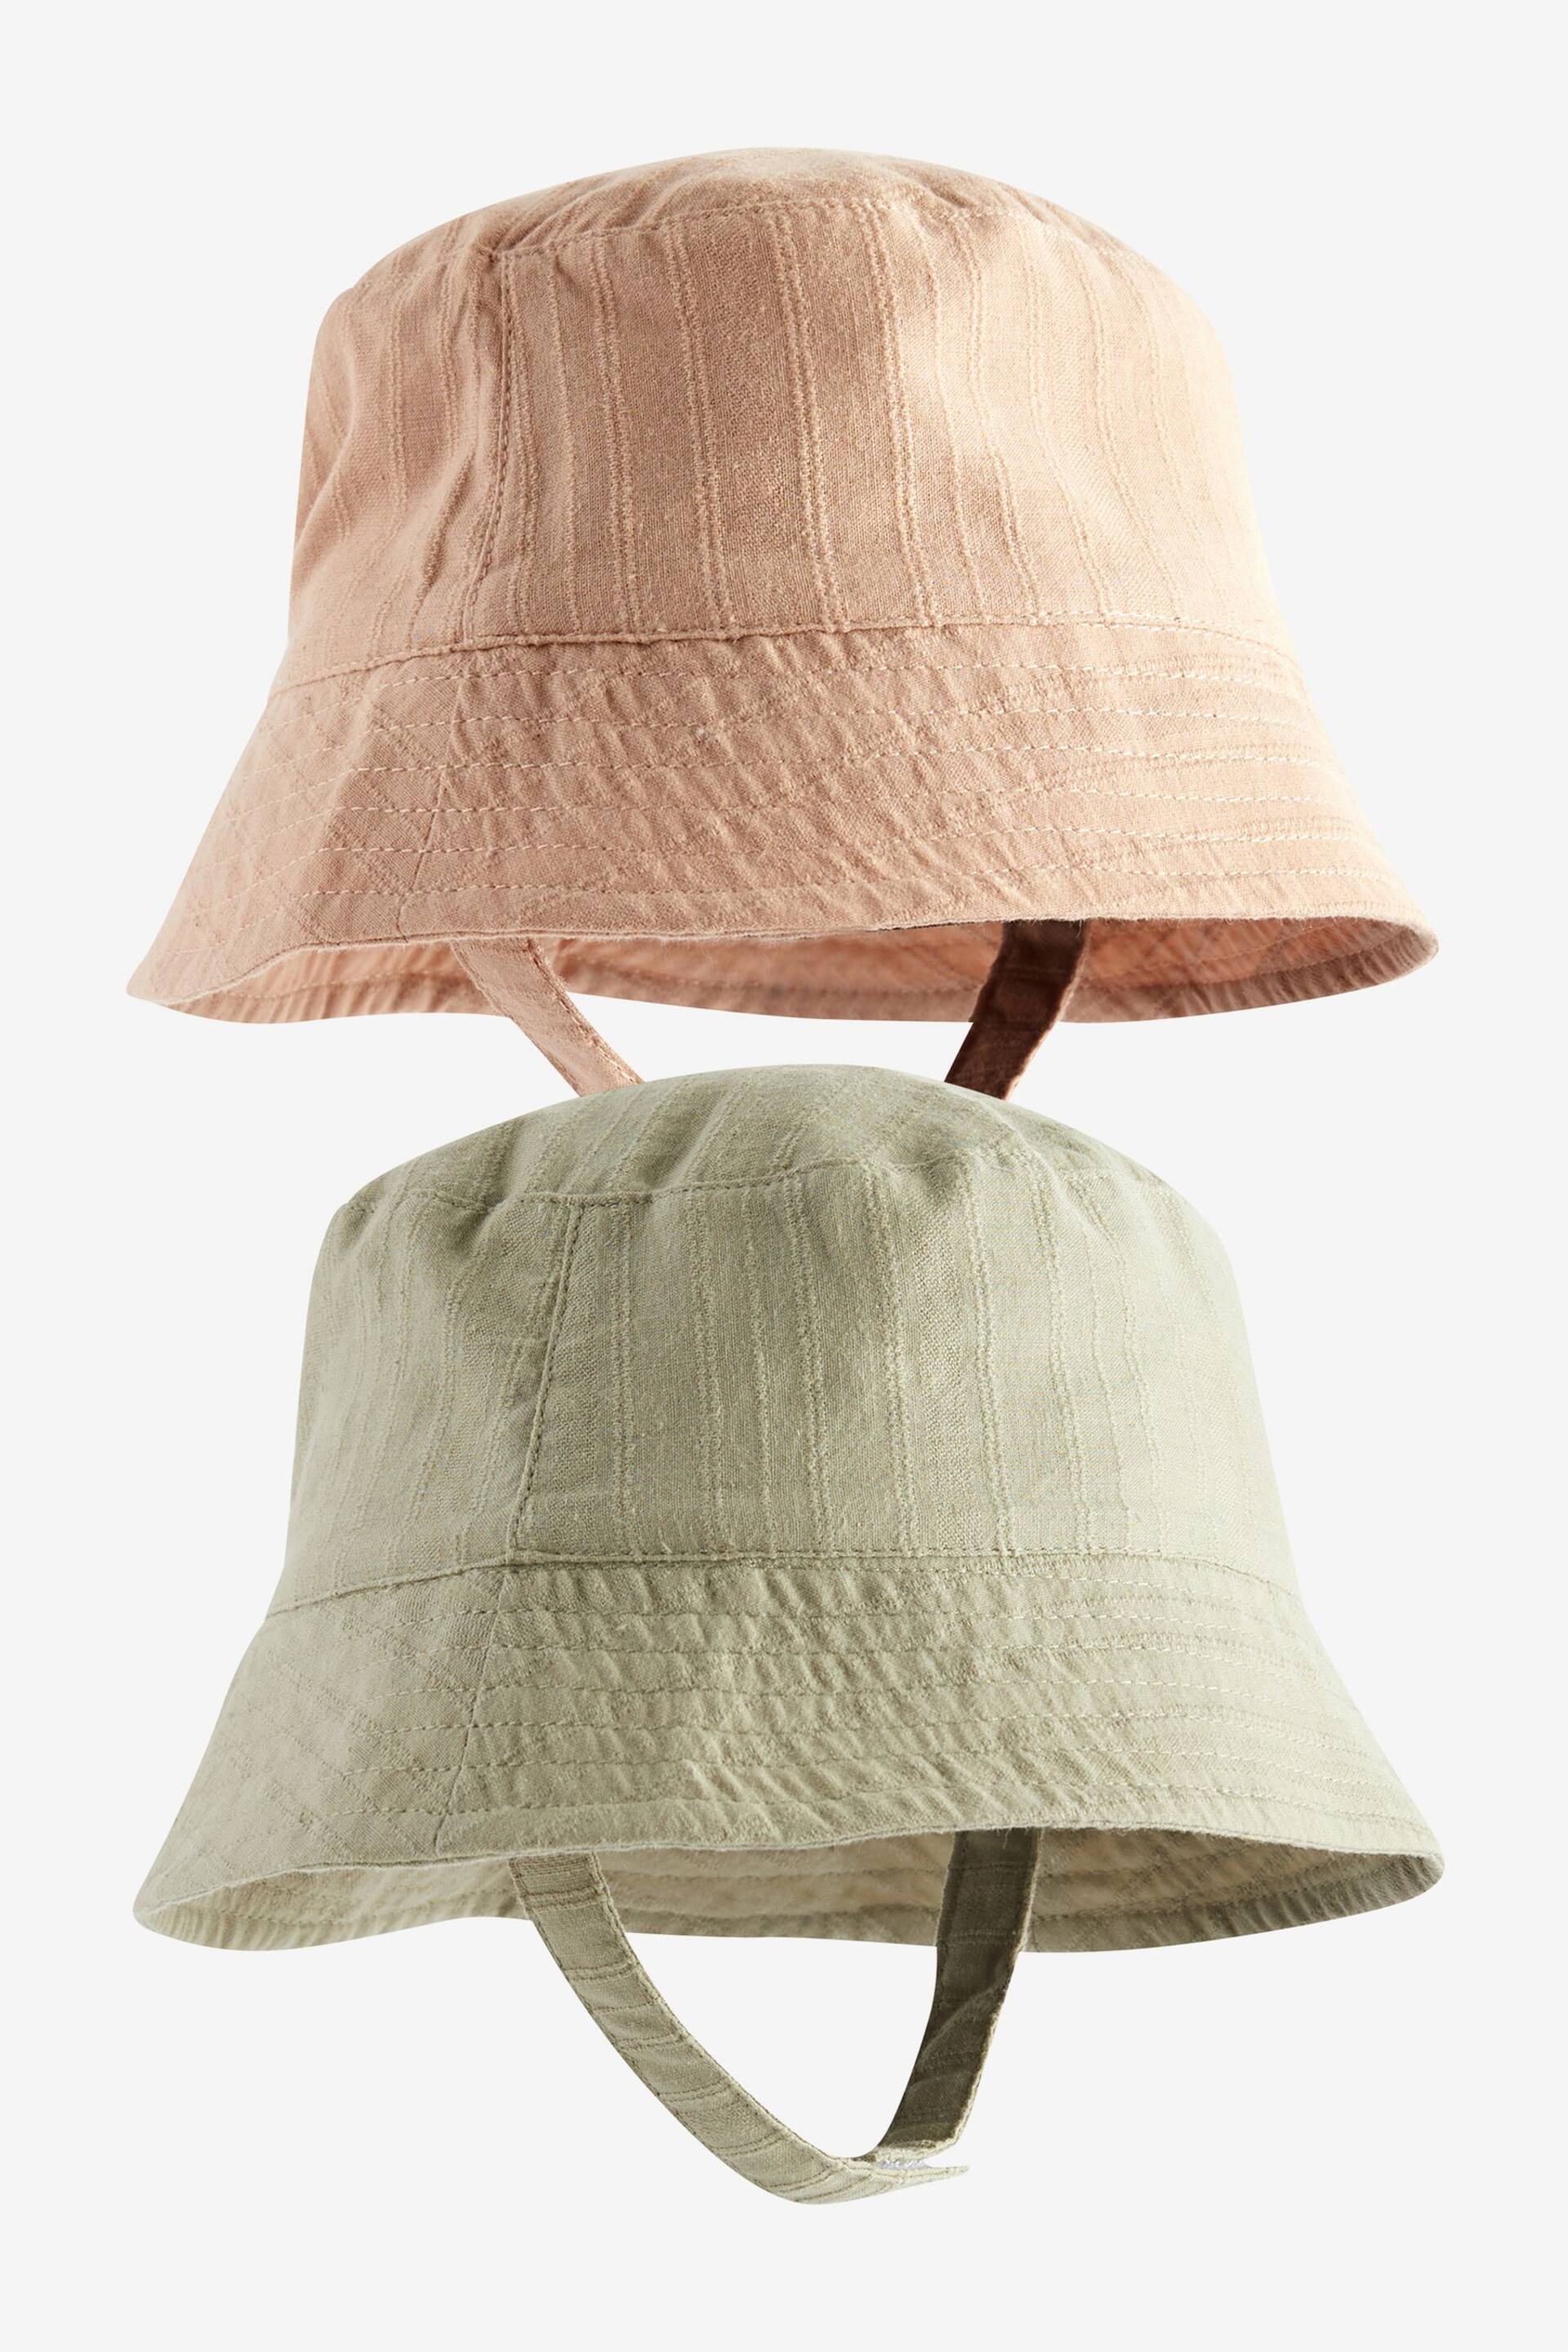 Sage Green / Apricot Orange Baby Bucket Hats 2 Pack (0mths-2yrs) - Image 1 of 6